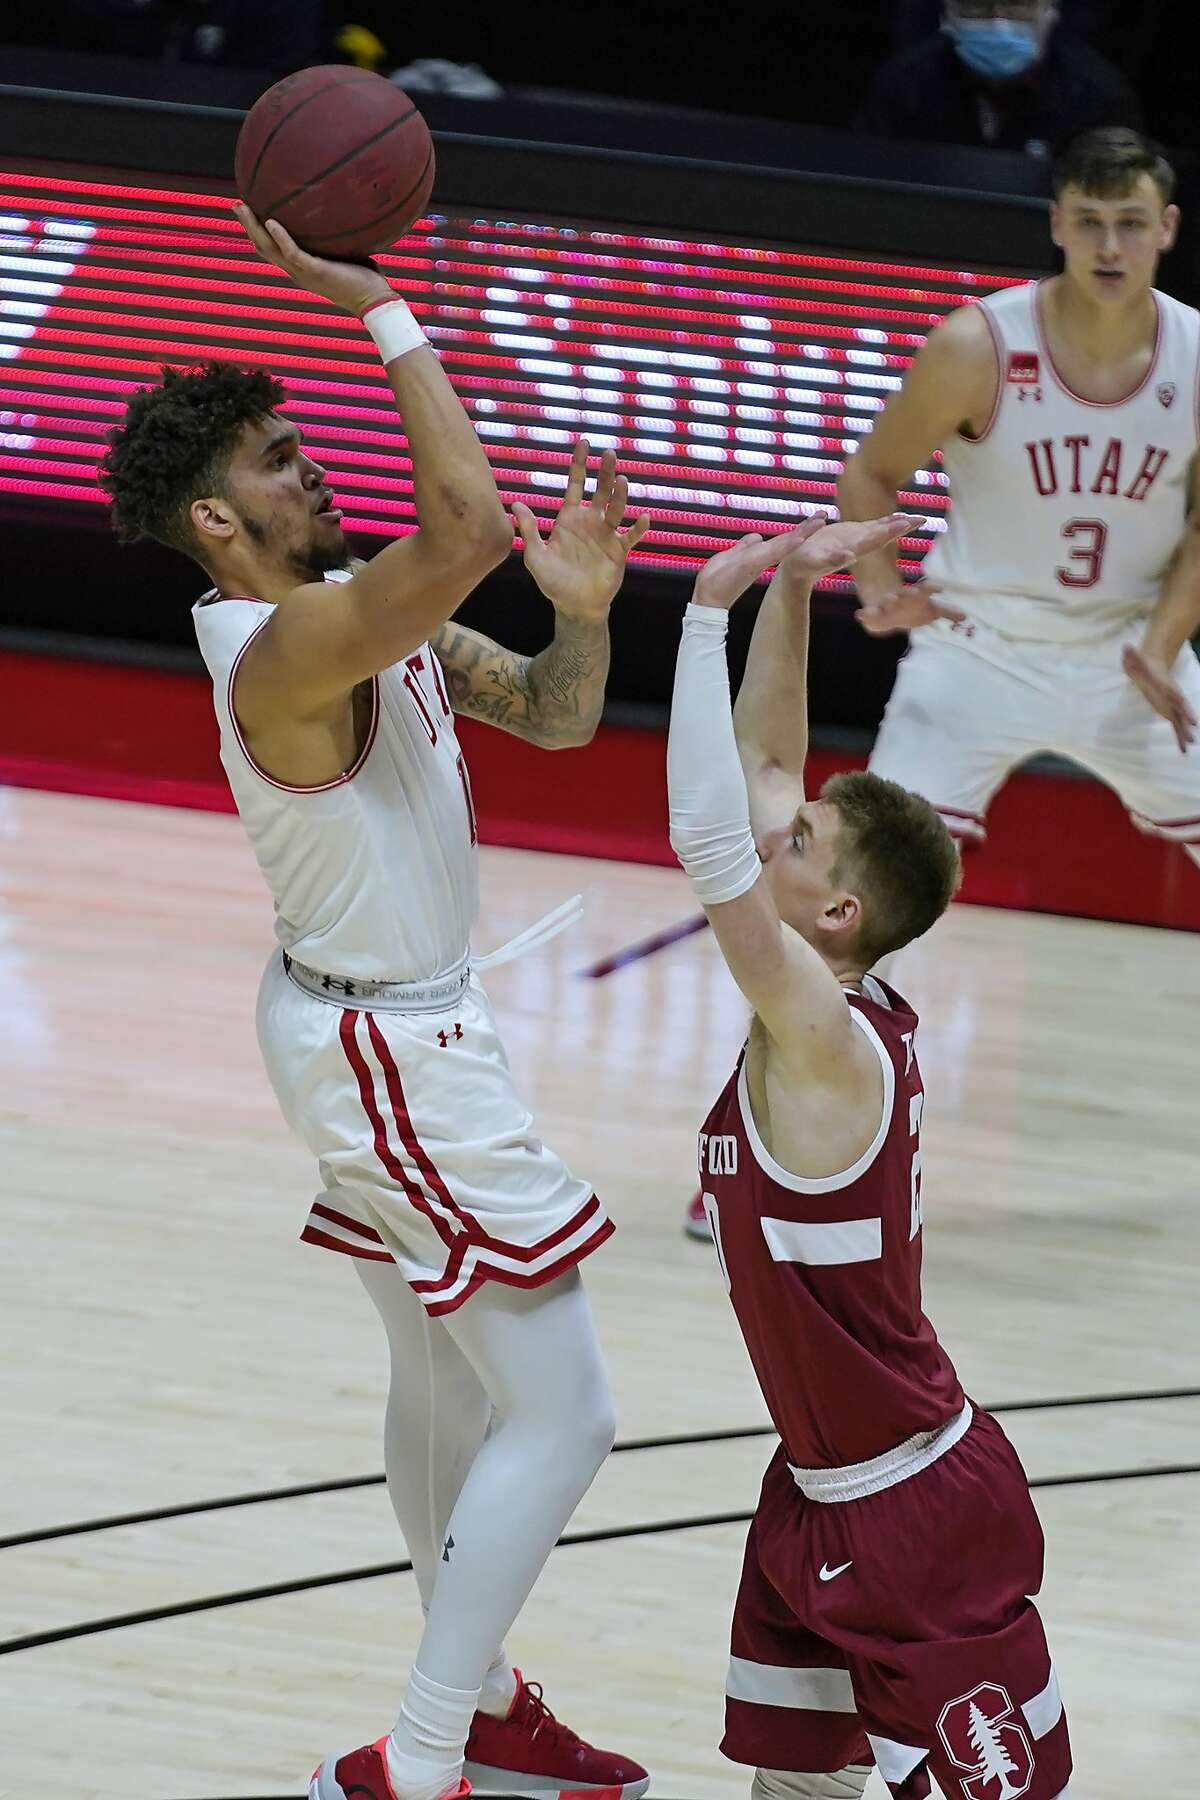 Utah forward Timmy Allen, left, shoots over Stanford guard Noah Taitz during the second half of an NCAA college basketball game Thursday, Jan. 14, 2021, in Salt Lake City. (AP Photo/Rick Bowmer)